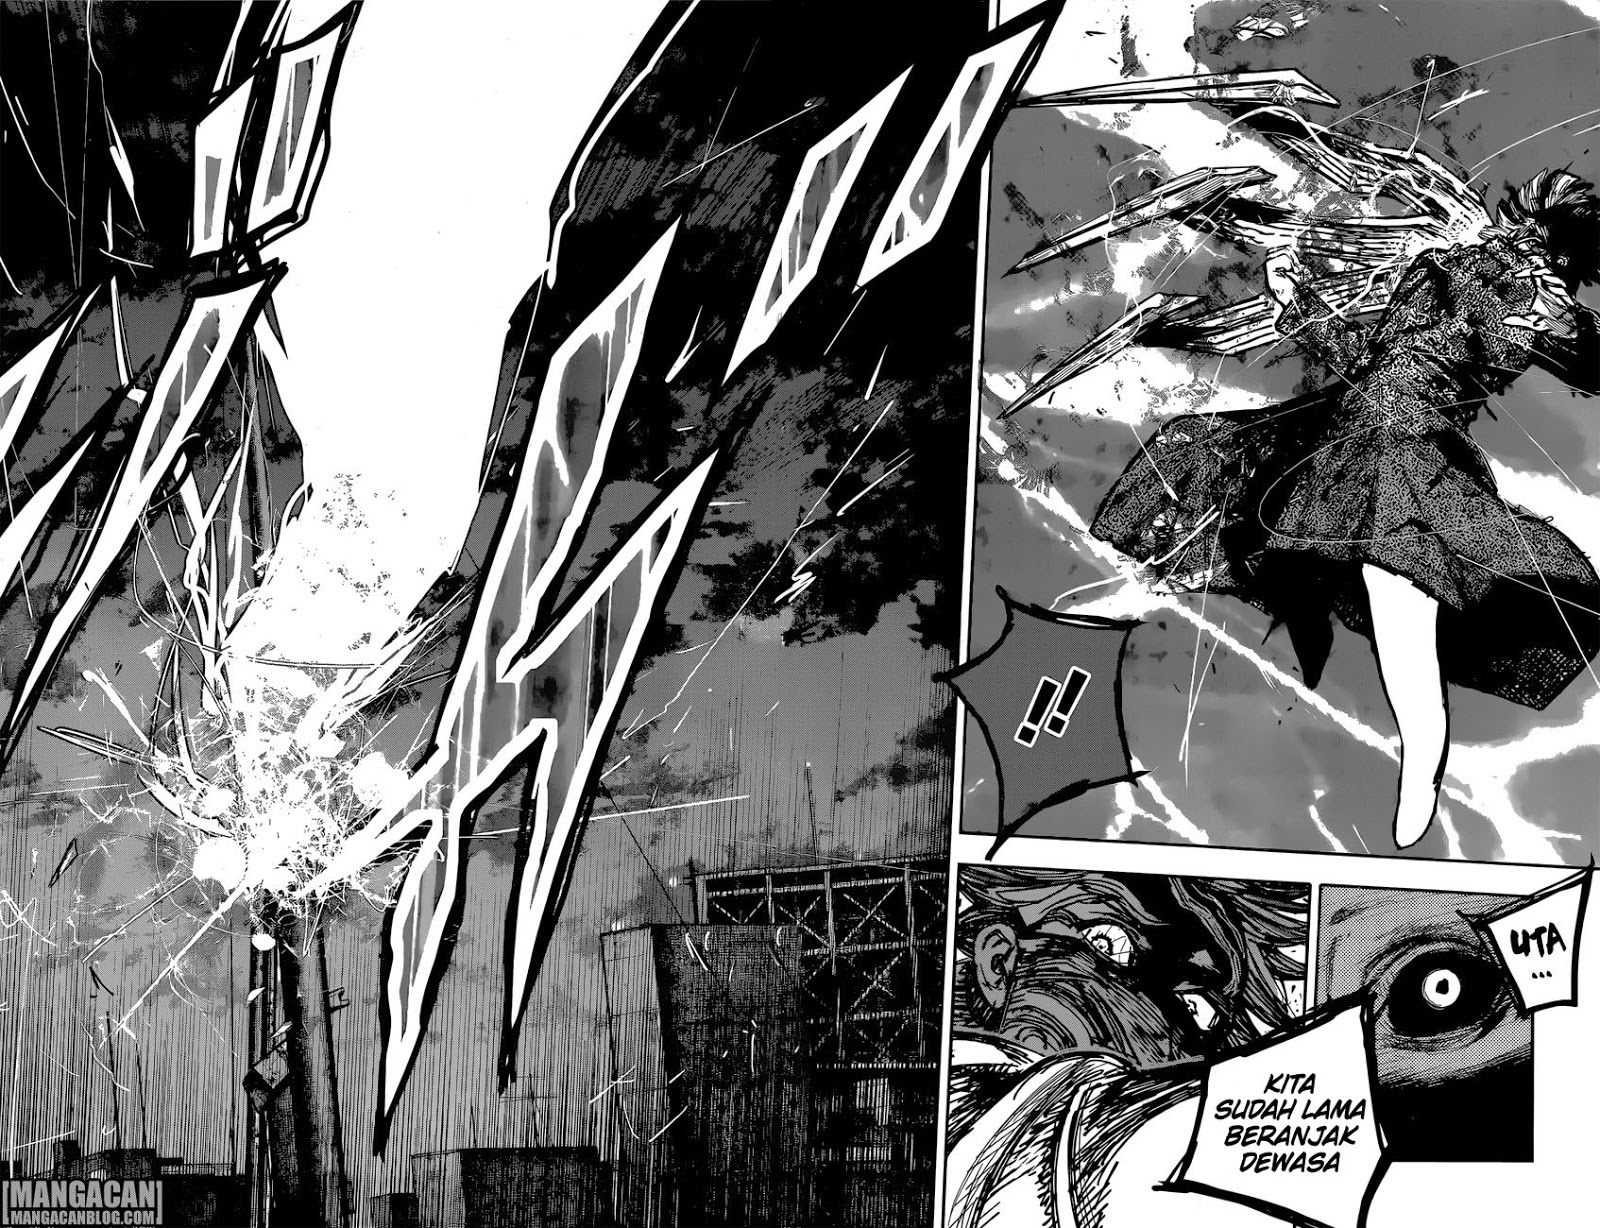 Tokyo Ghoul:re Chapter 170